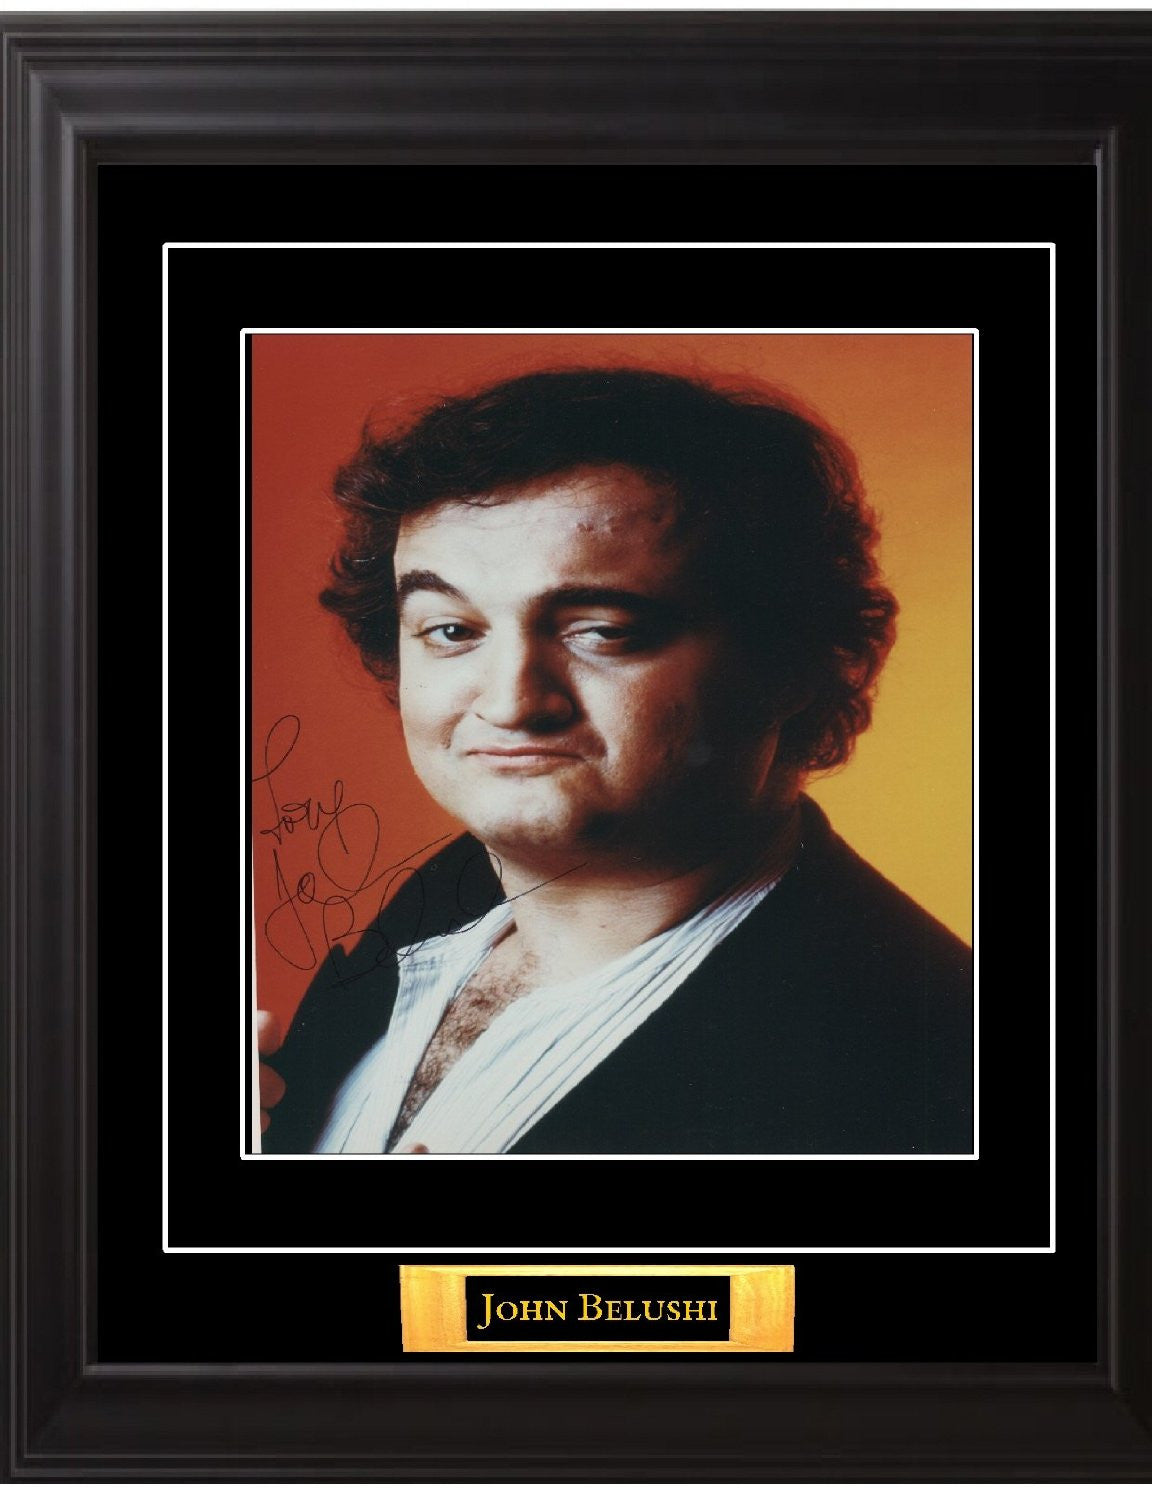 John Belushi Autographed 8"x10" Photo - Zion Graphic Collectibles